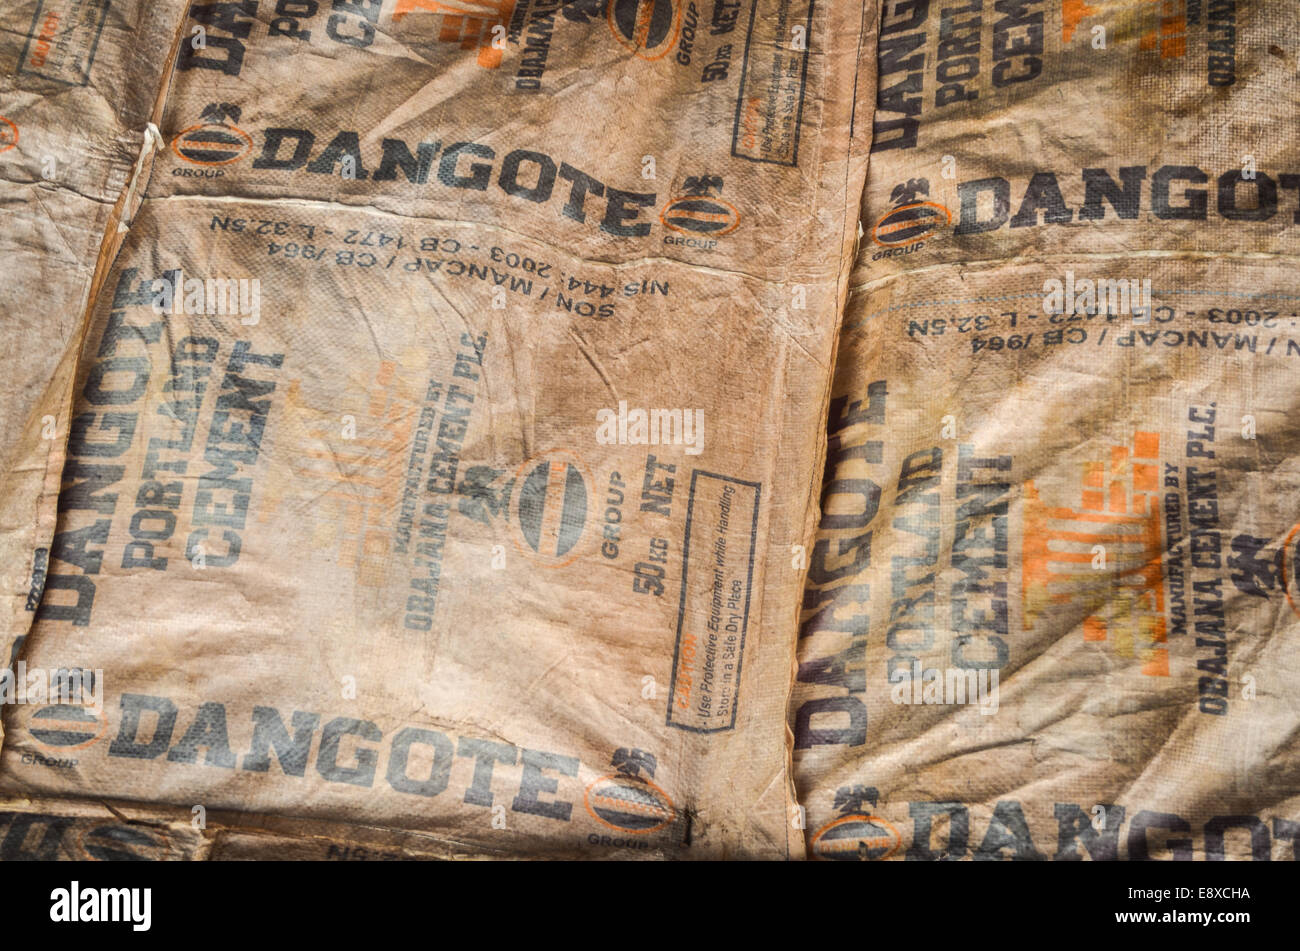 Dangote High Resolution Stock Photography and Images - Alamy